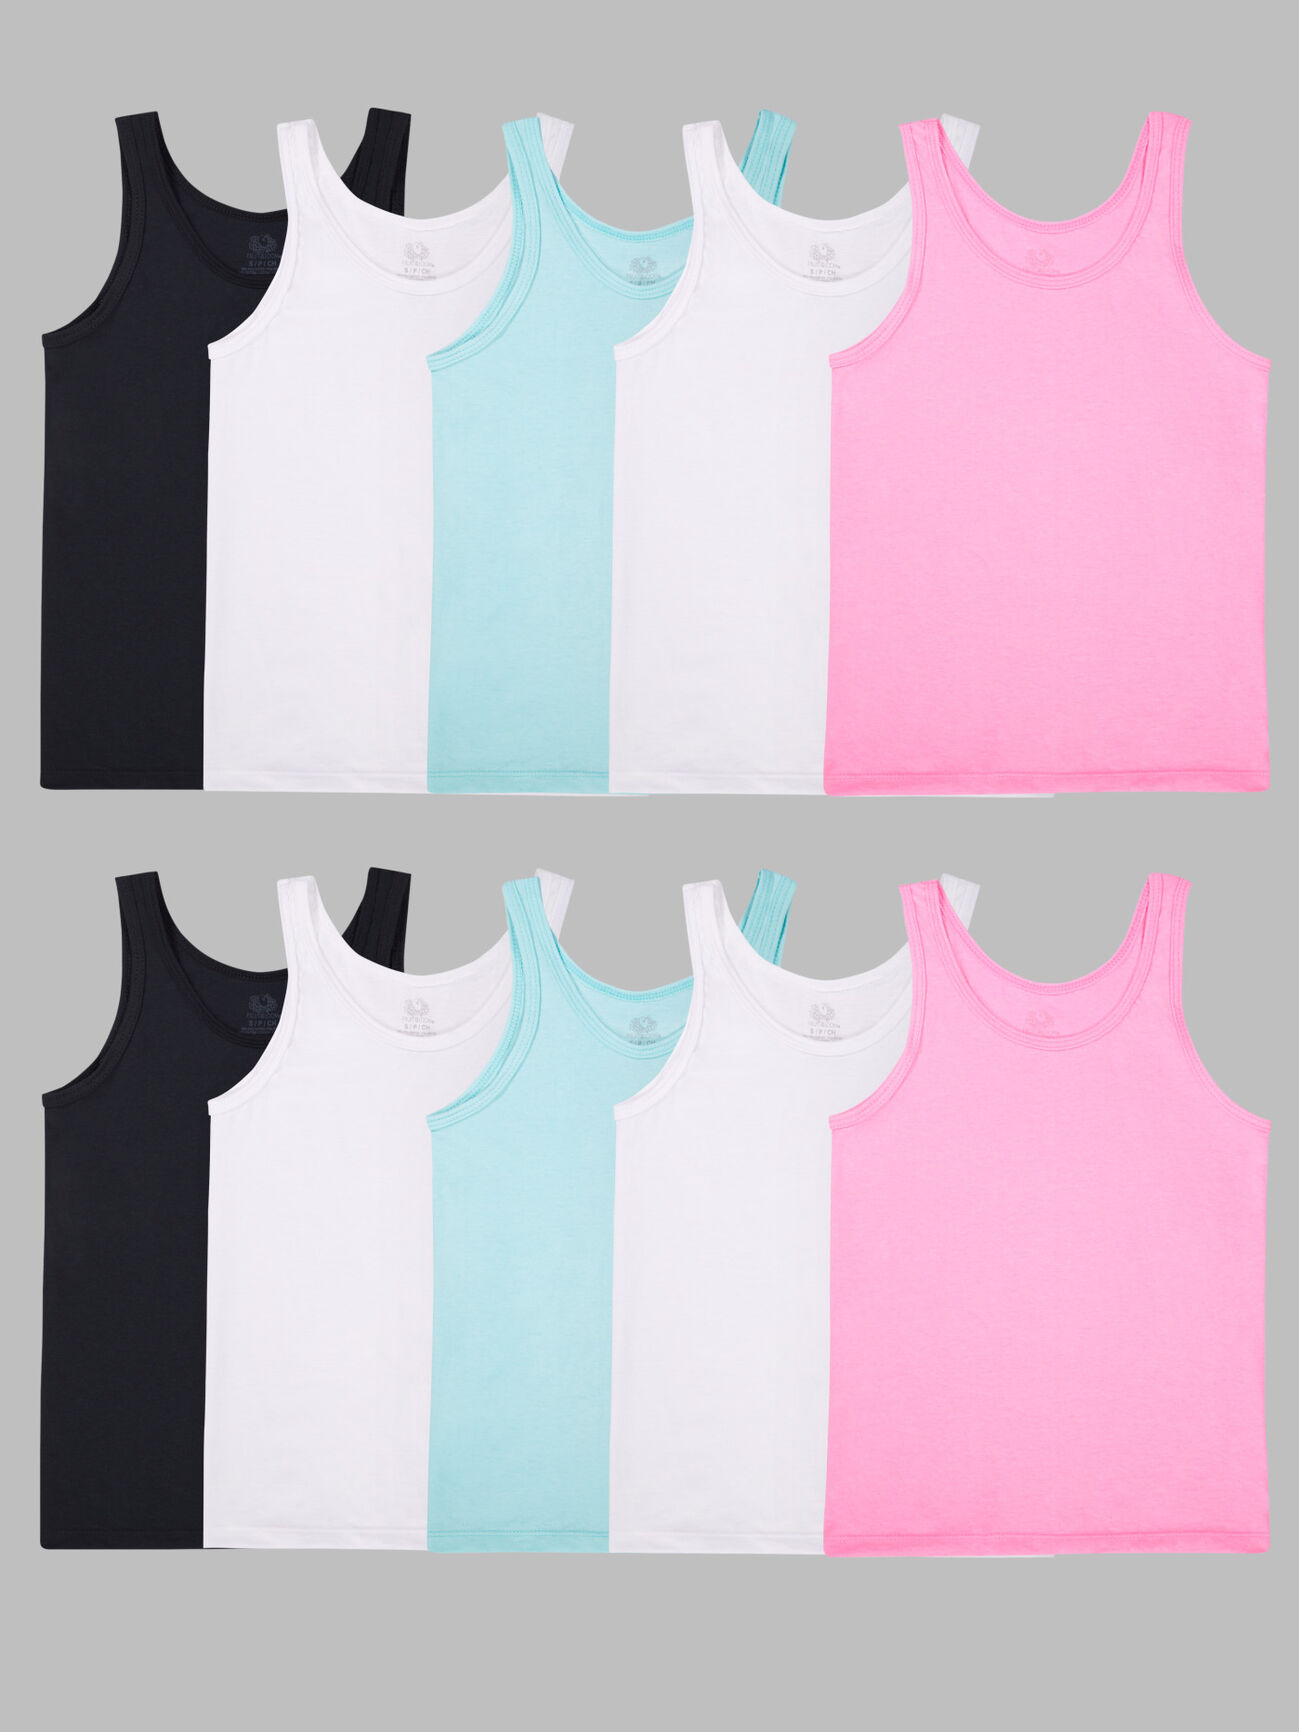 Girls' Tank Tops, 10 Pack | Shop Fruit of the Loom